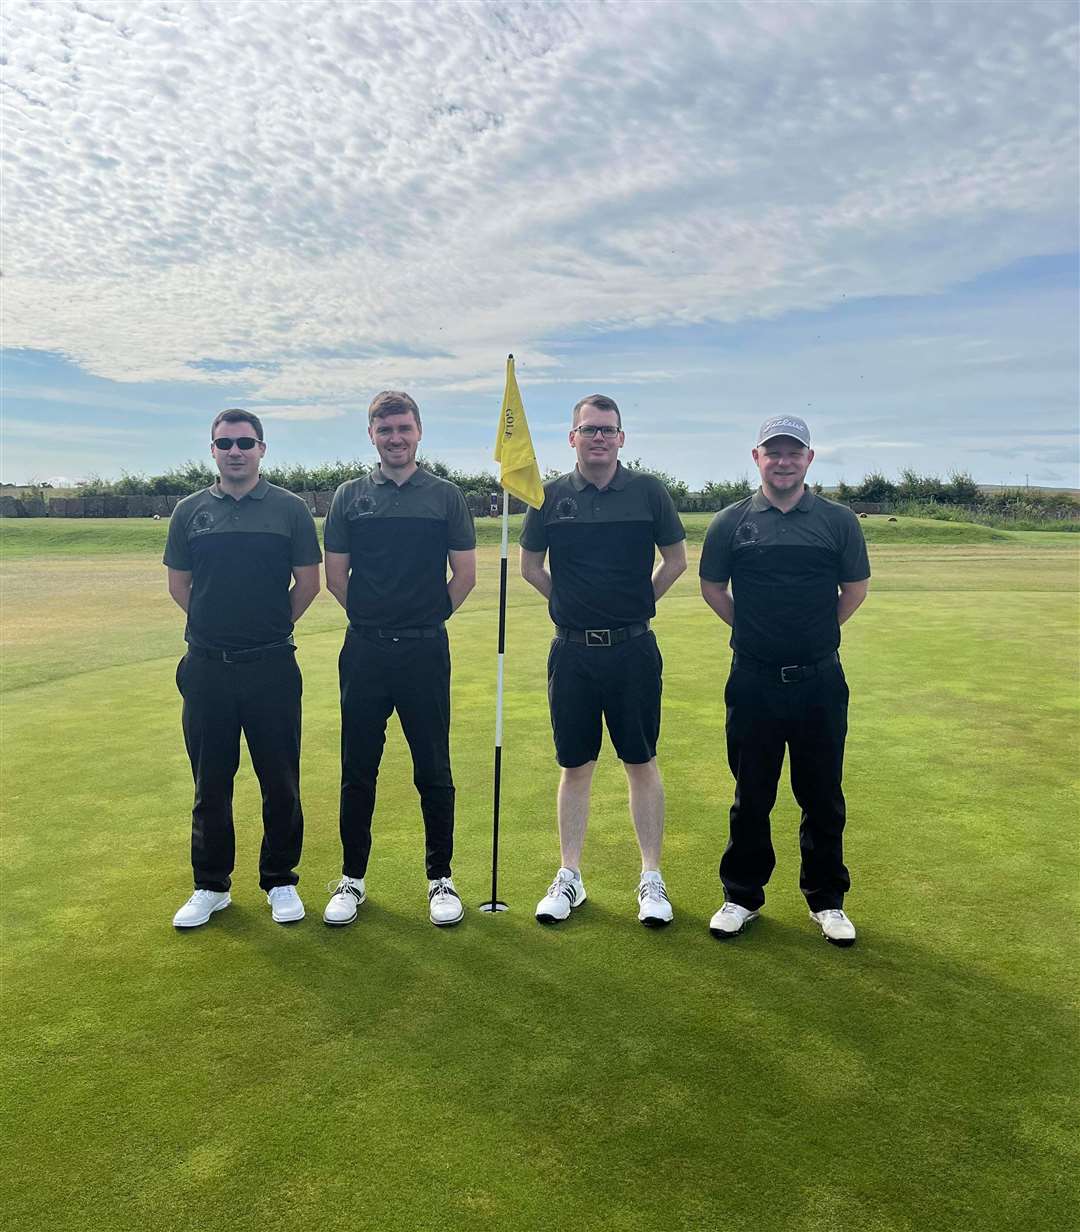 The Reay team of Michael Smith, Tom Ross, Brent Munro and Jason Norwood who won the Wilson Cup hosted by Thurso Golf Club recently. Reay defeated Wick in the final, with extra holes required to determine the winner.